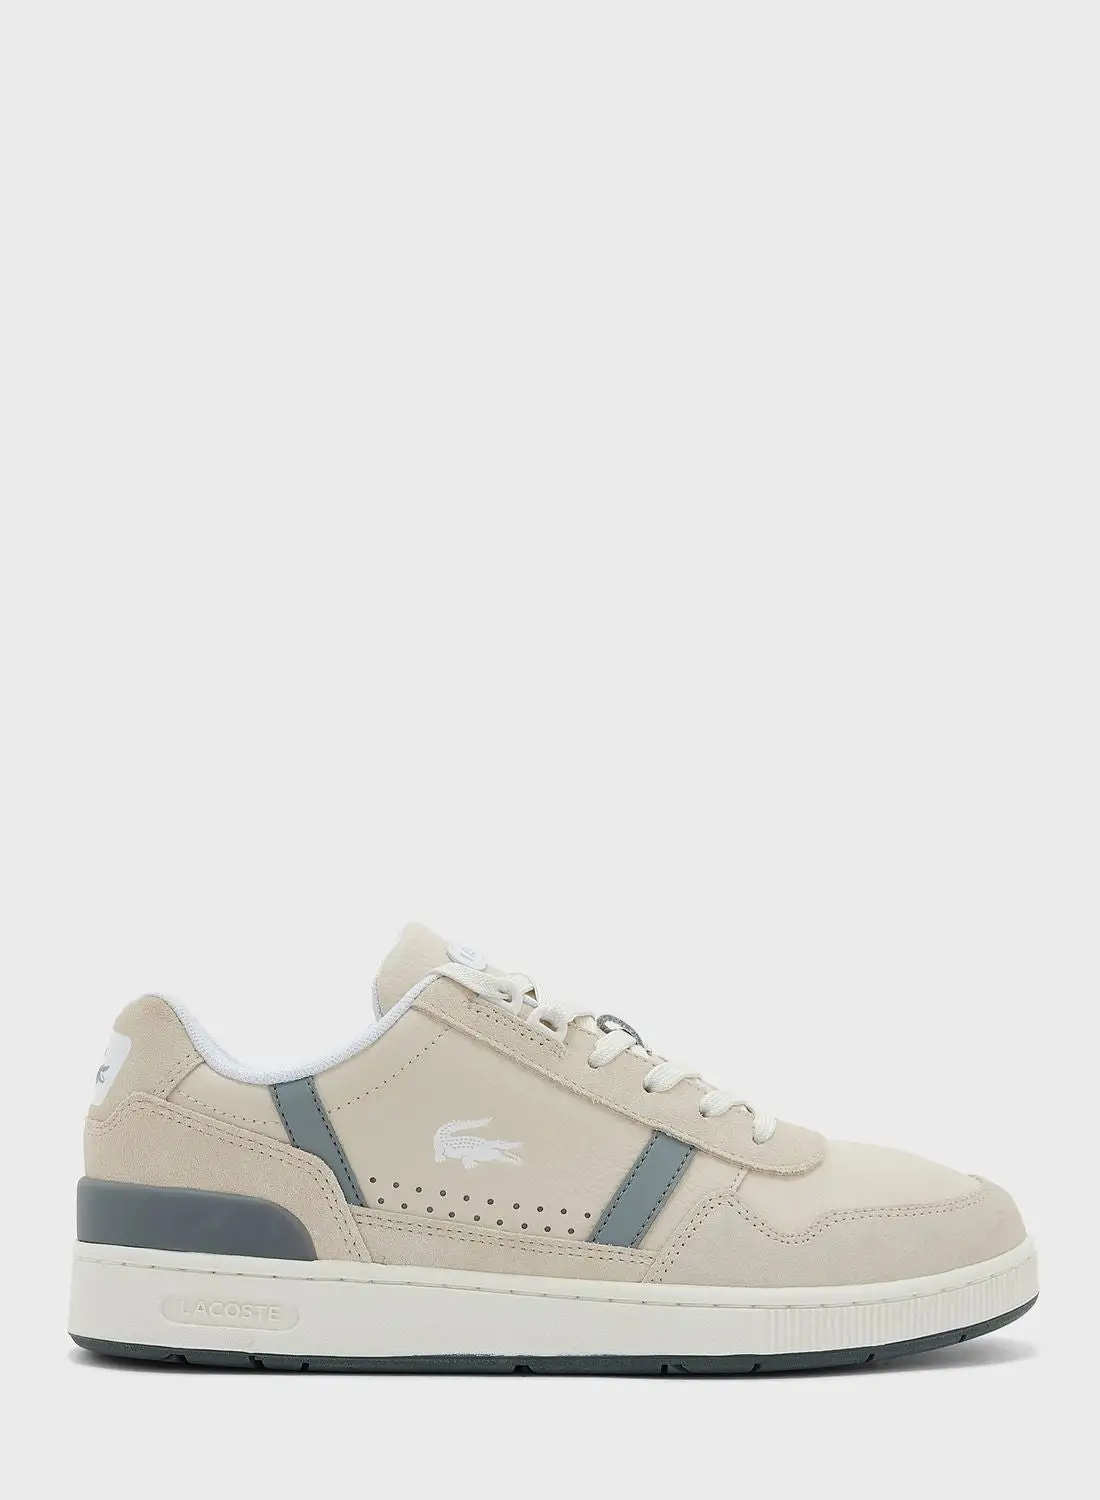 LACOSTE Casual Low Top Sneakers